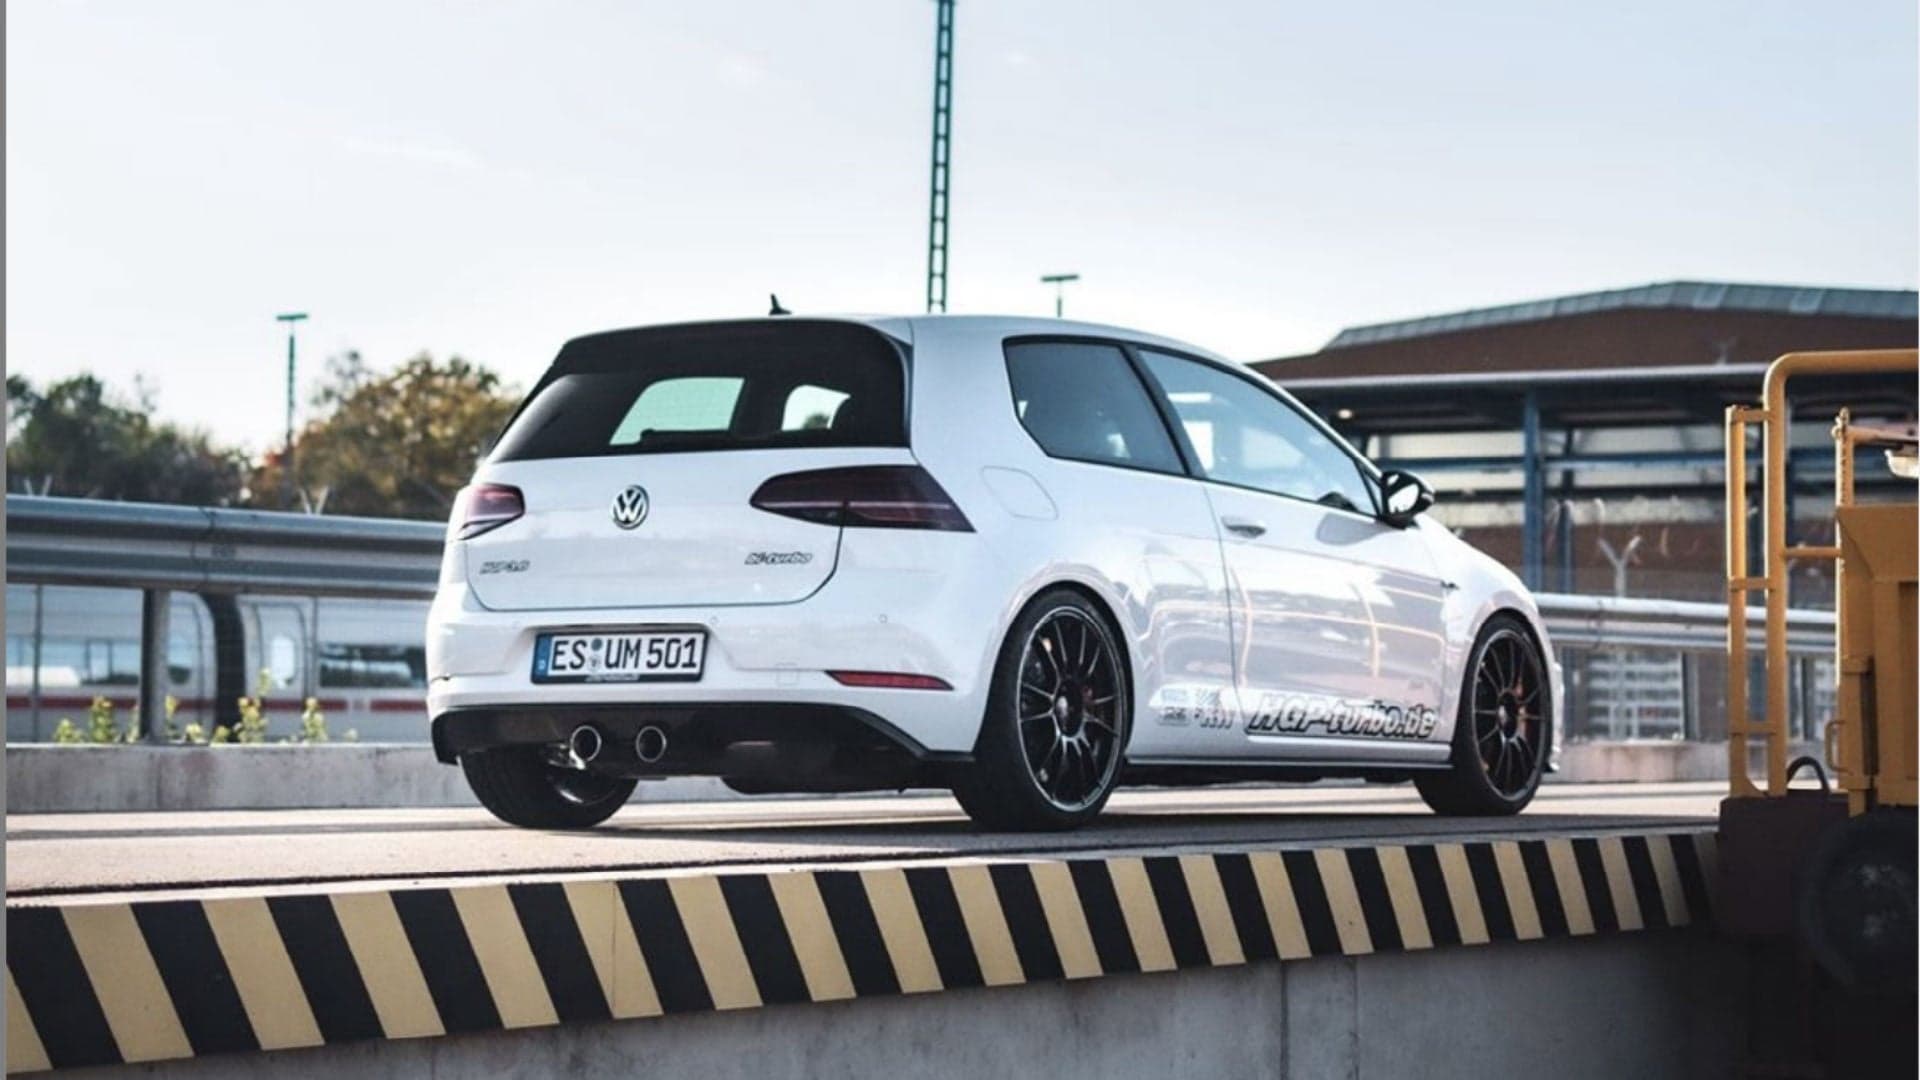 Watch a Two-Door, VR6-Swapped VW Golf R Touch 220 MPH on the Autobahn